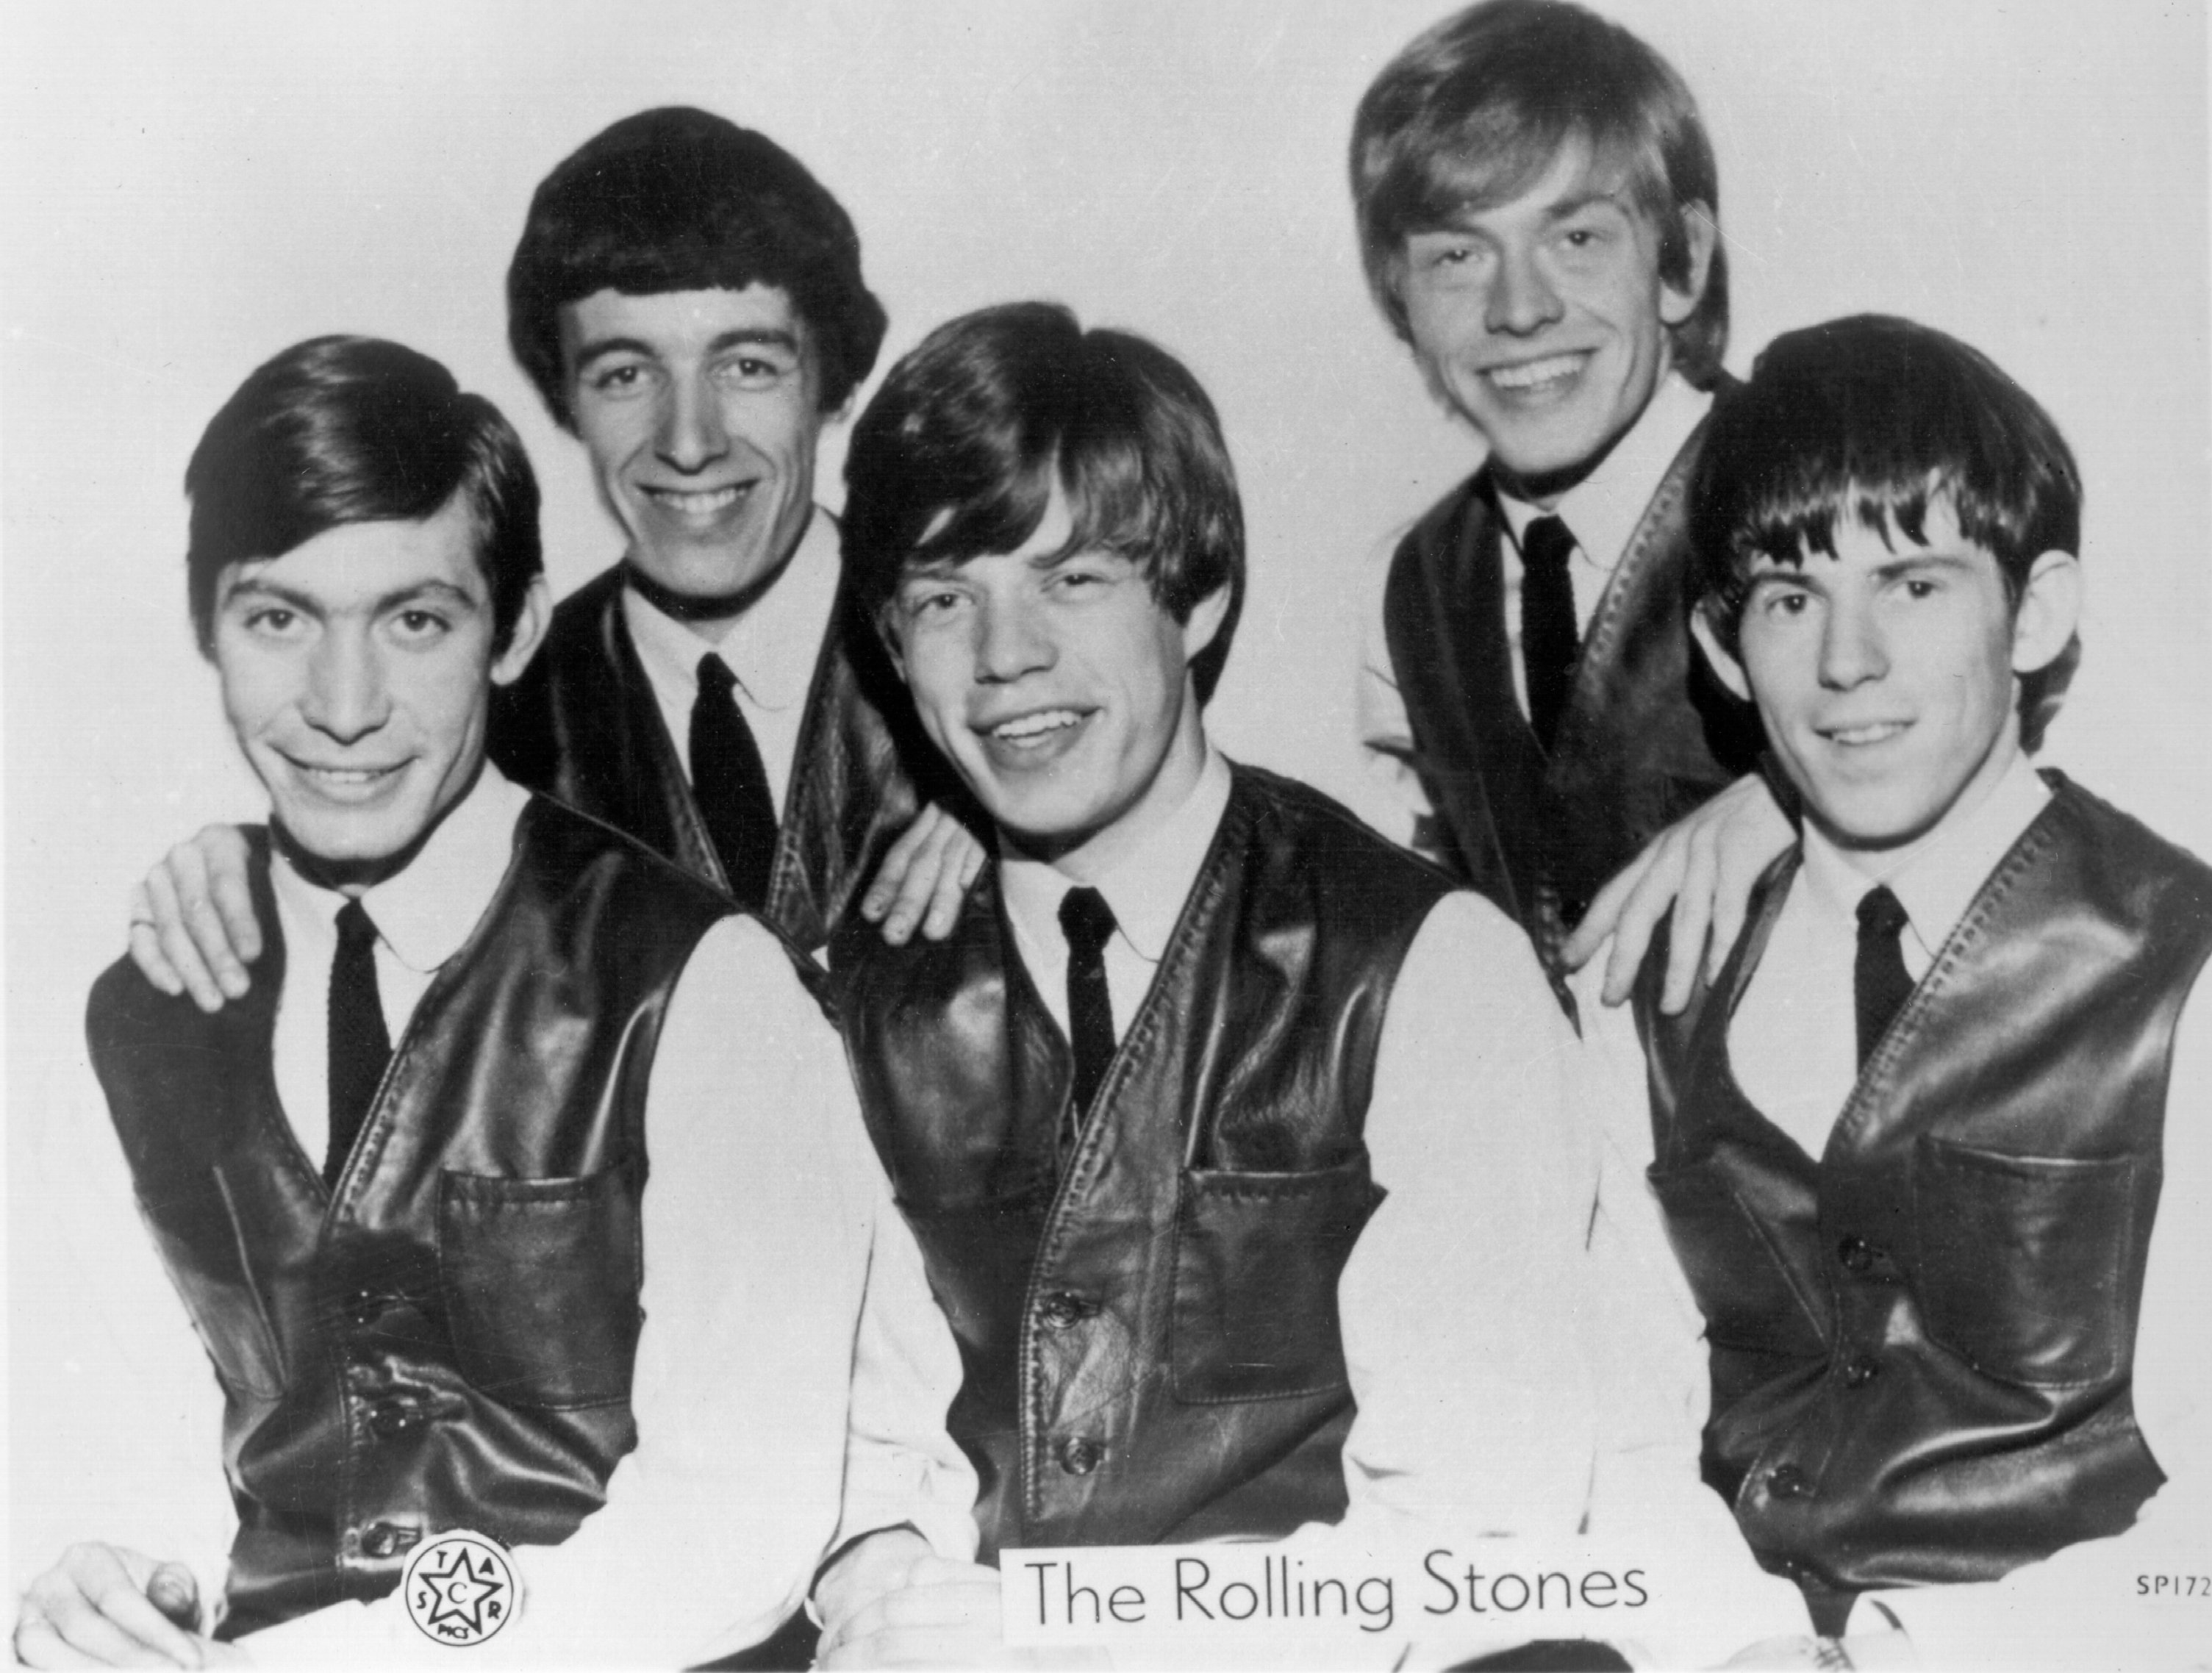 The Rolling Stones' Charlie Watts, Bill Wyman, Mick Jagger, Brian Jones, and Keith Richards smiling